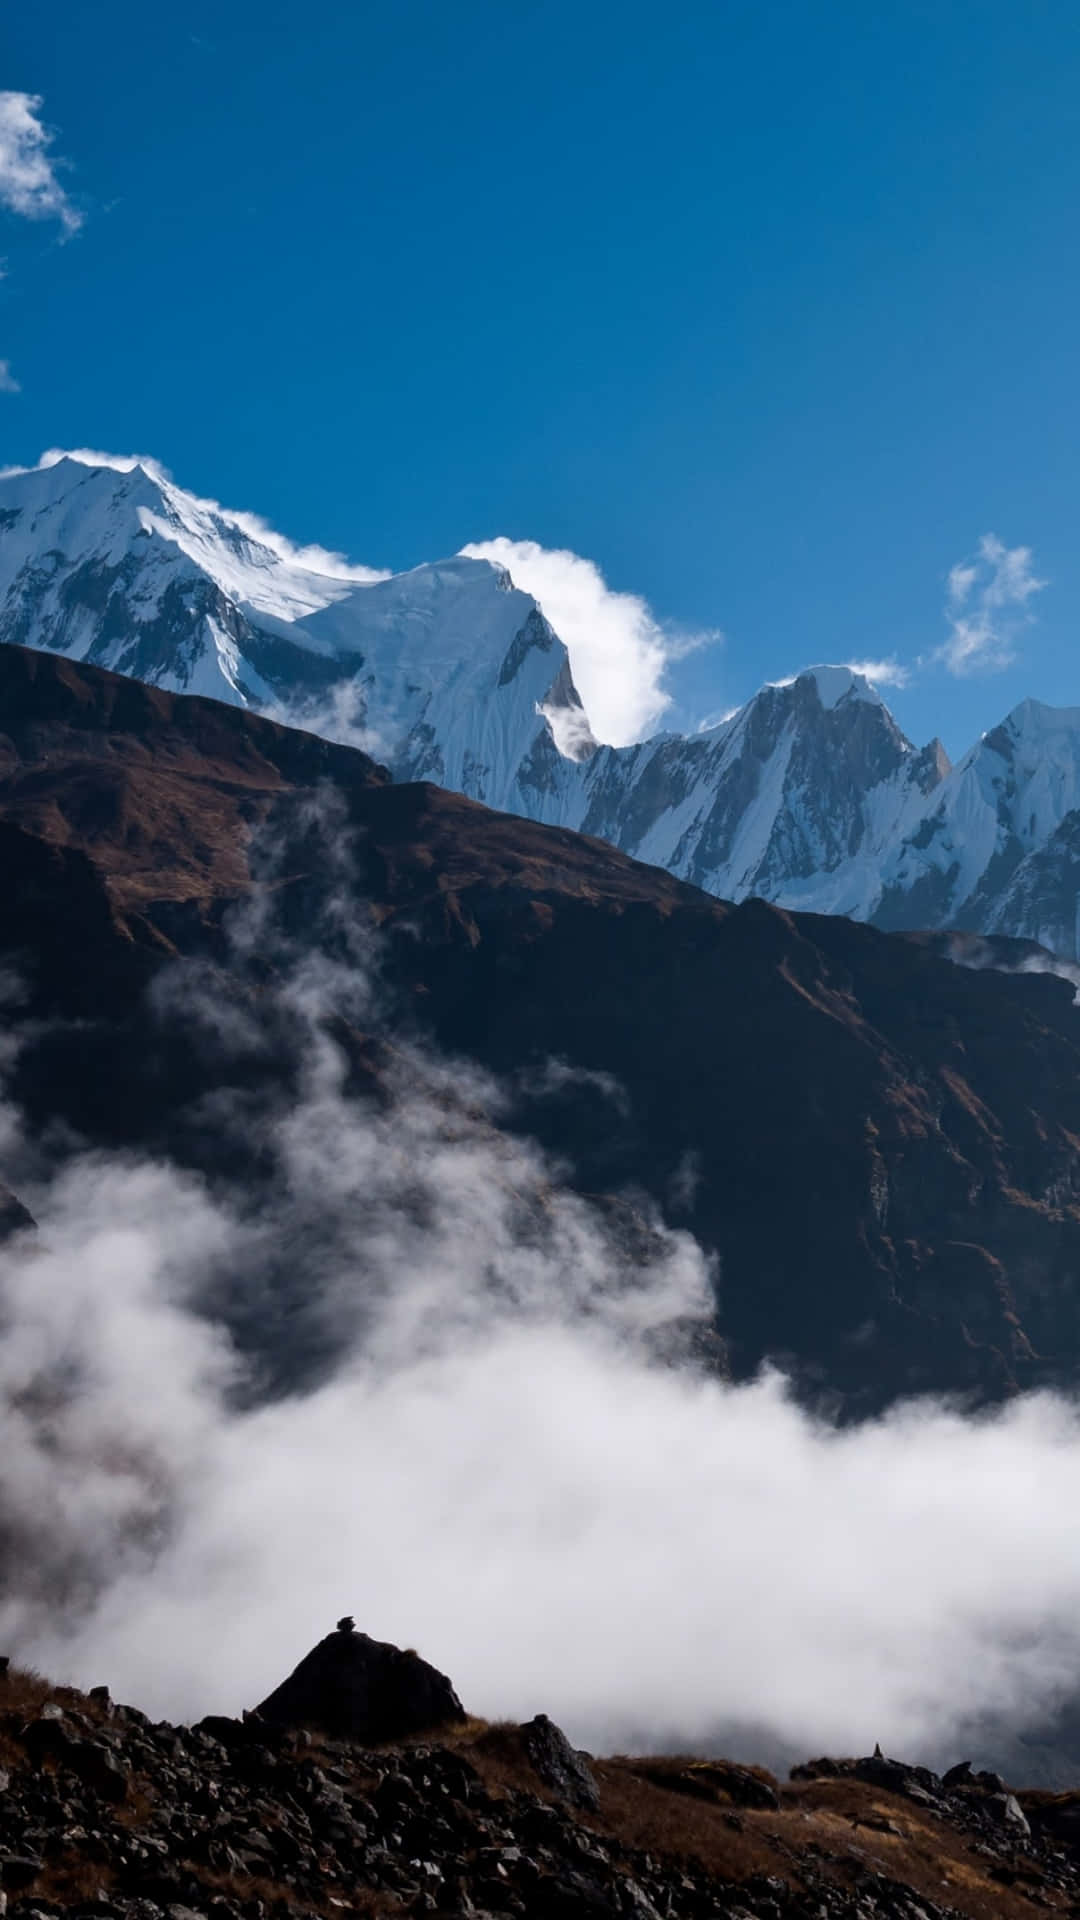 The picturesque majesty of the Himalaya